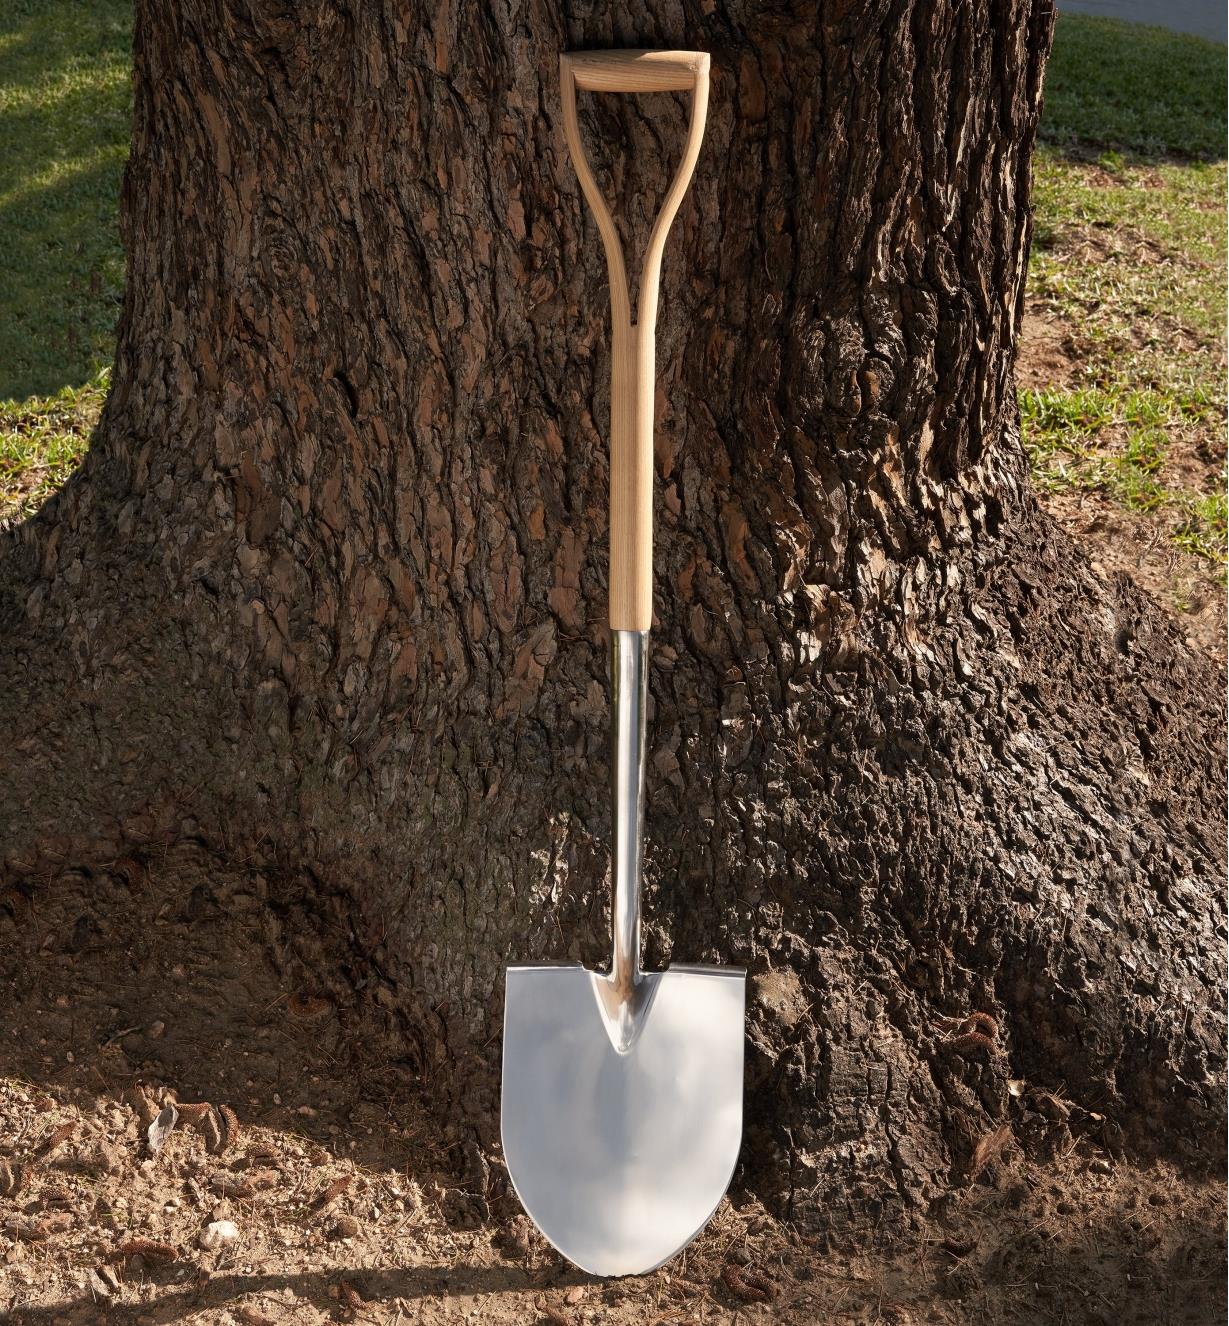 The stainless-steel shovel resting against a tree